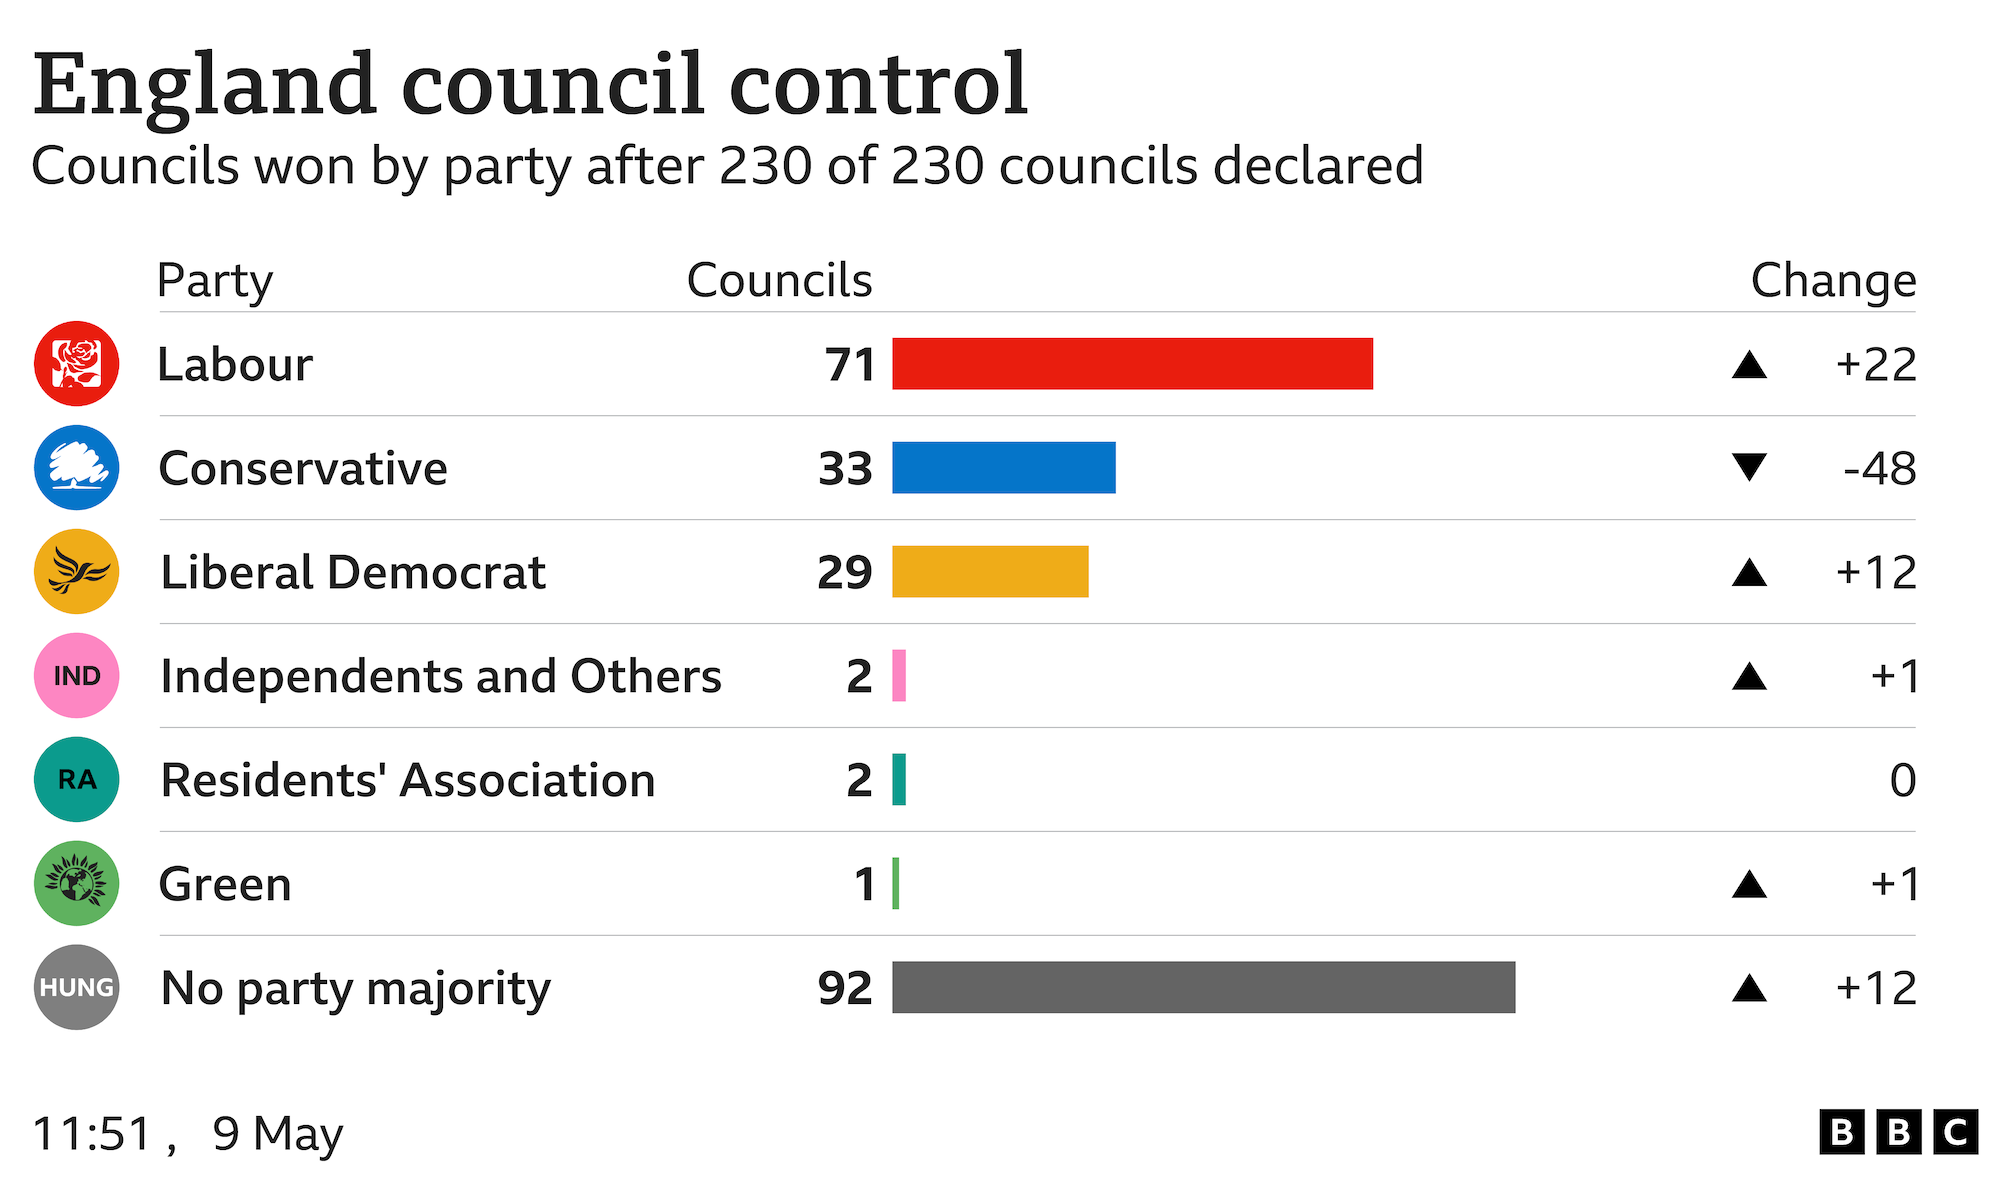 The largest parties after 230 of 230 councils declared are as follows: Labour 71 councils; Conservative 33 councils; Liberal Democrat 29 councils; Independents and Others 2 councils; Residents' Association 2 councils; Green 1 councils; No party majority 92 councils.